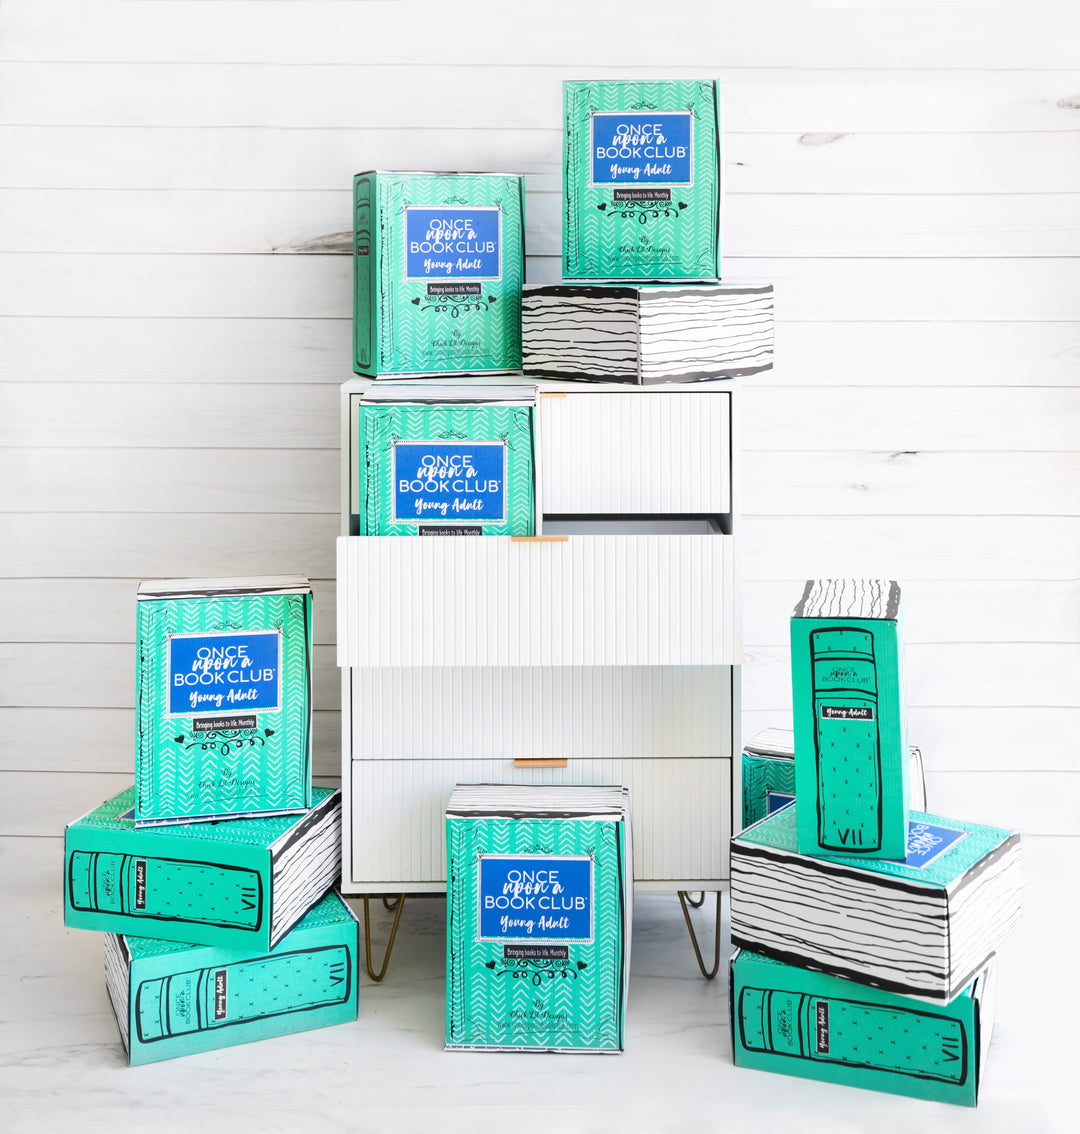 12 green Once Upon a Book Club Young Adult boxes sit on and around a chest of drawers